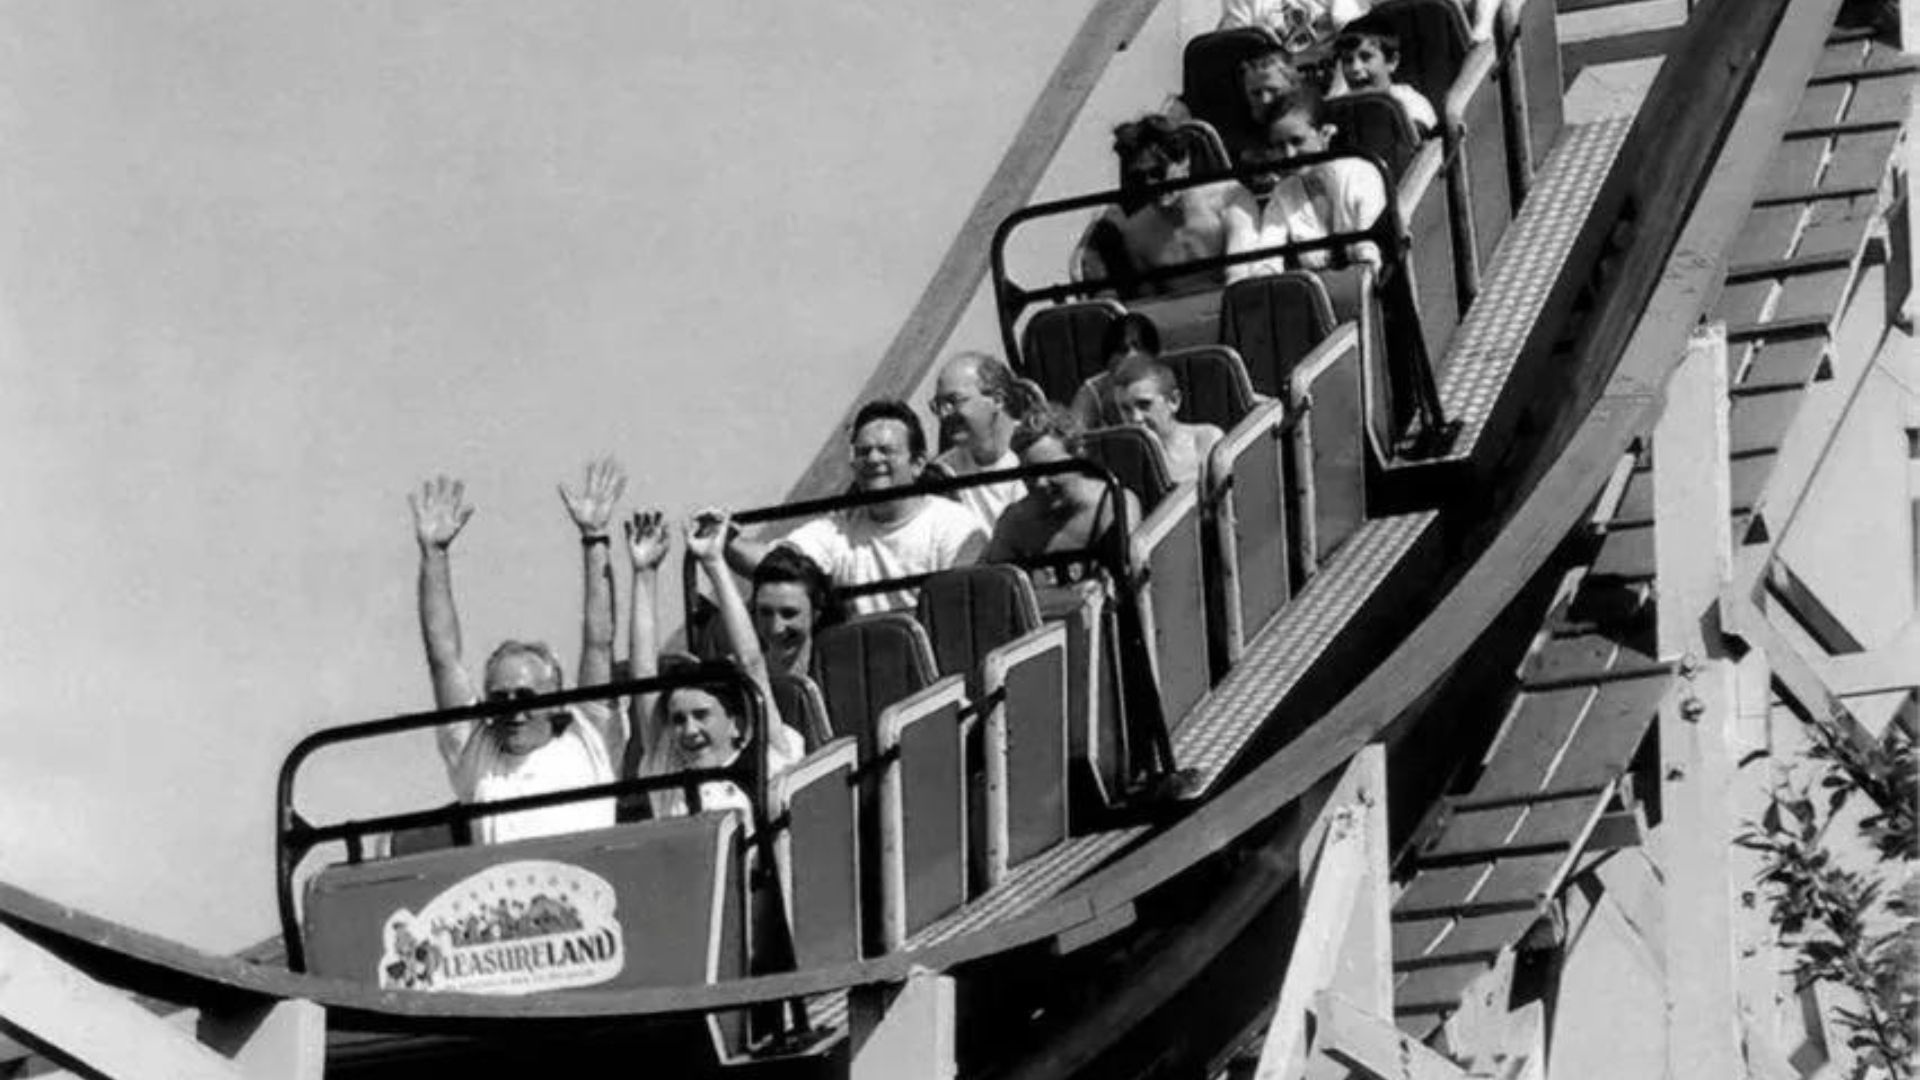 Journey with us through rollercoaster history to learn about the first rides and how they compare 